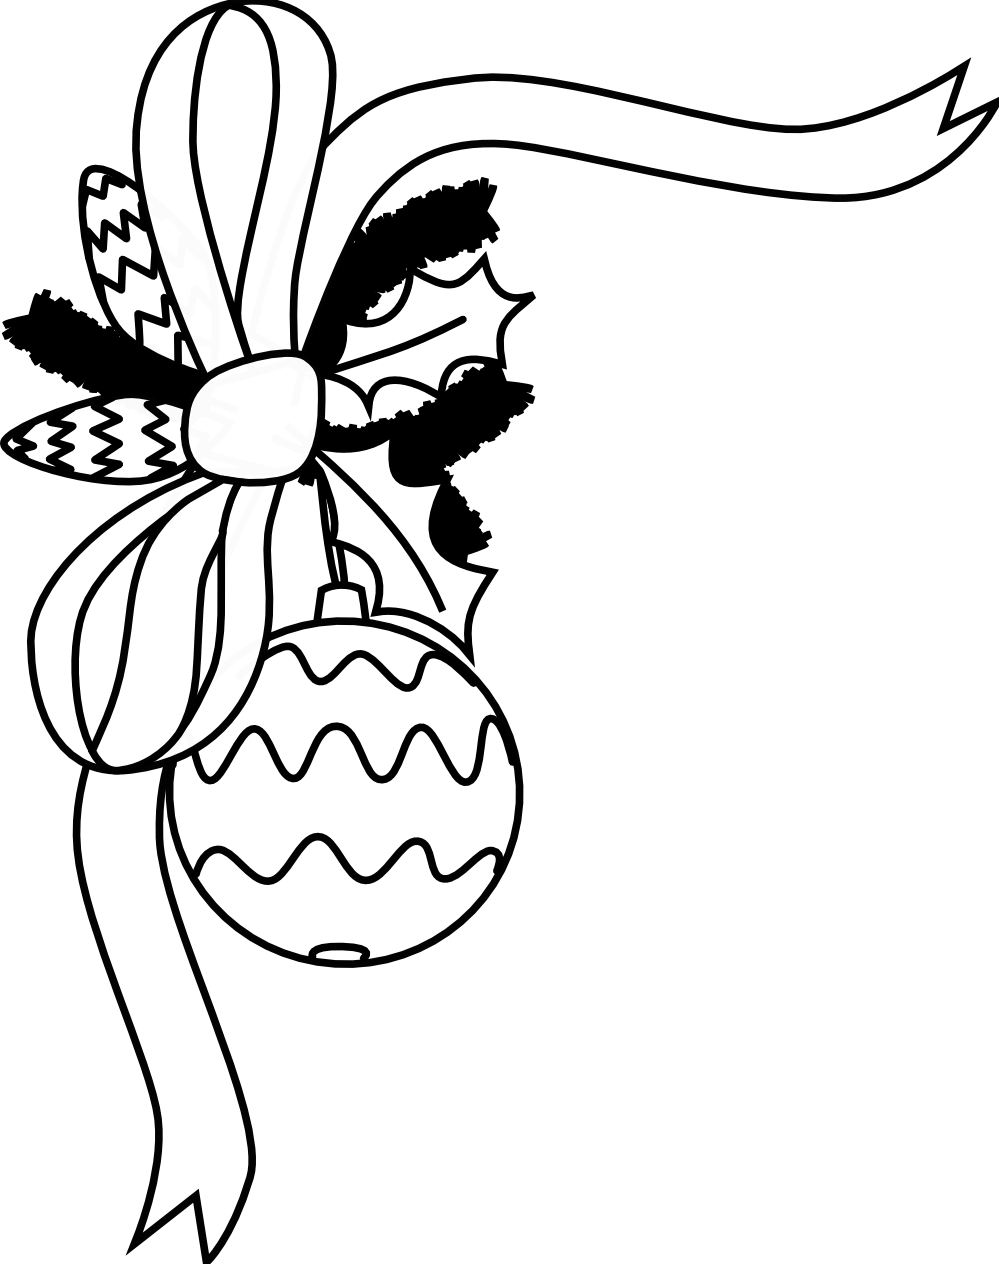 paisley clipart boarder